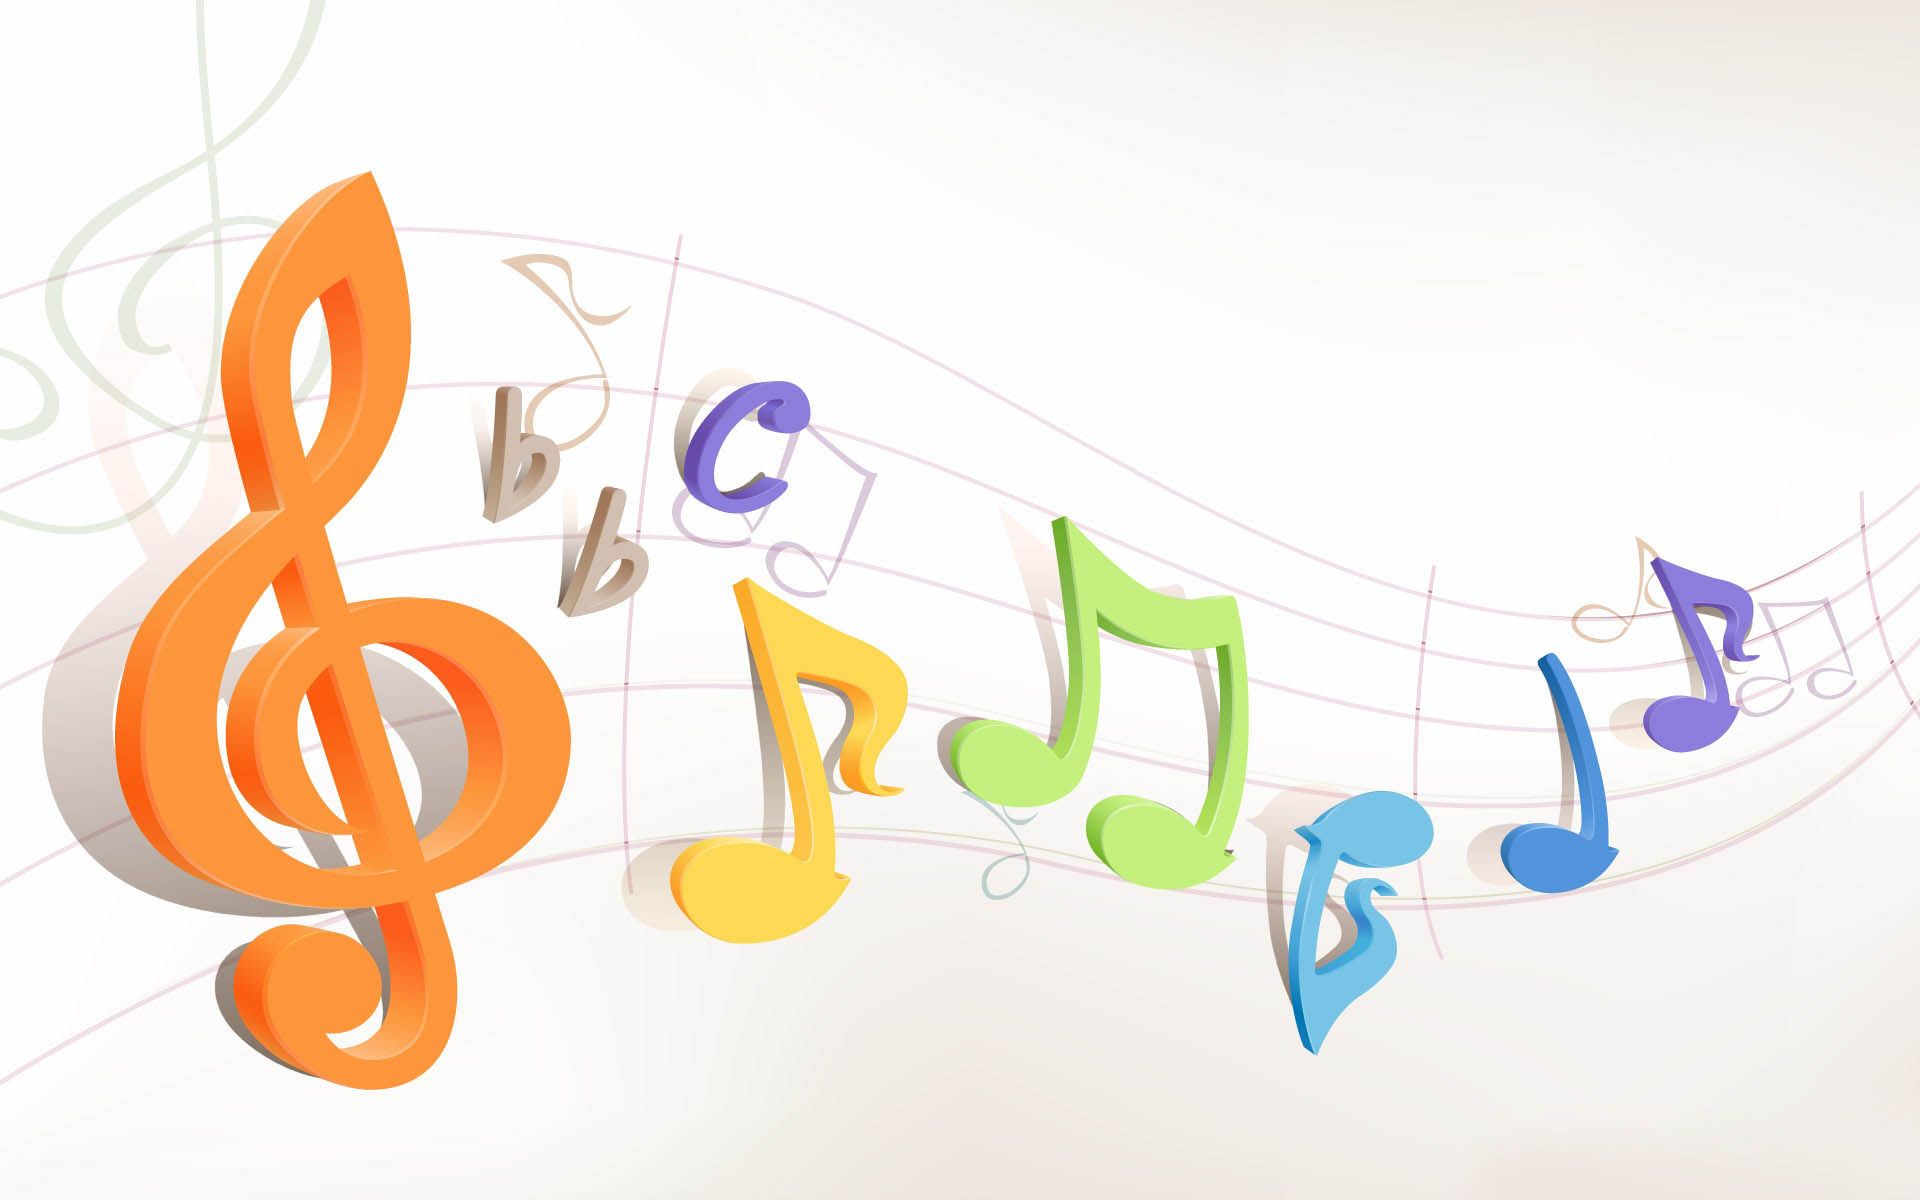 Coloured Single Music Notes - wallpaper.